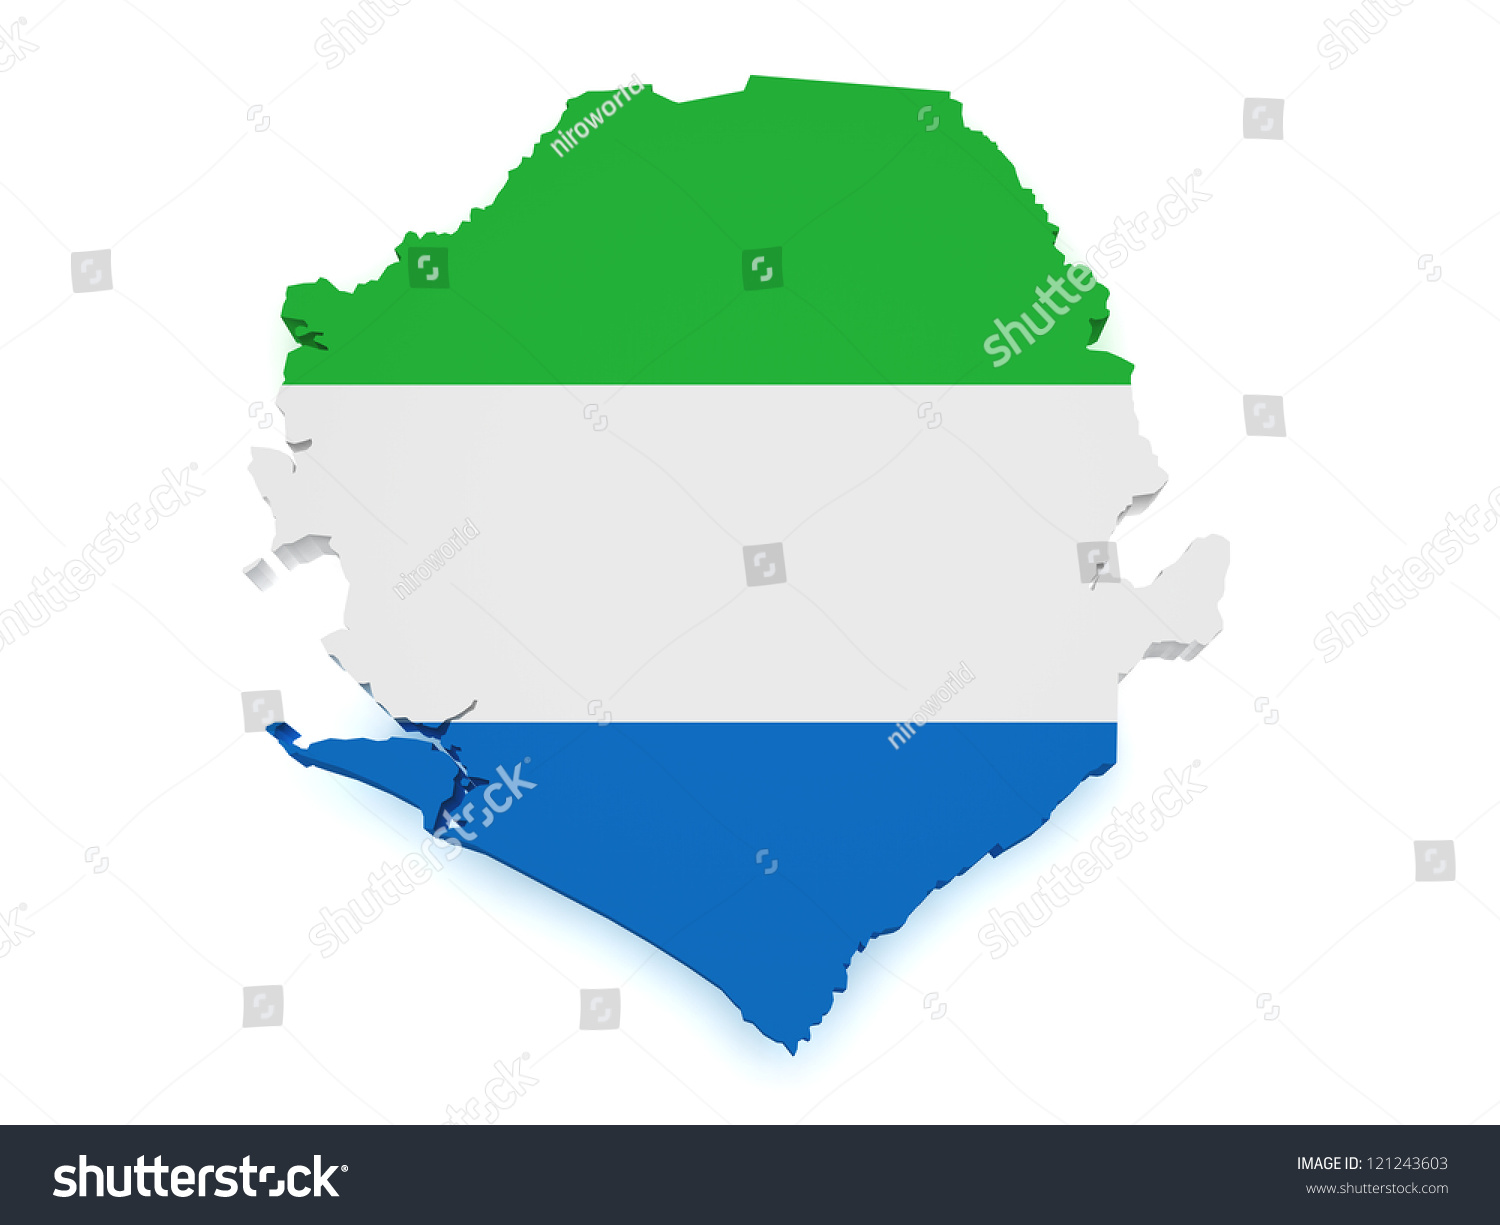 Shape 3d of Sierra Leone map with flag isolated - Royalty Free Stock ...